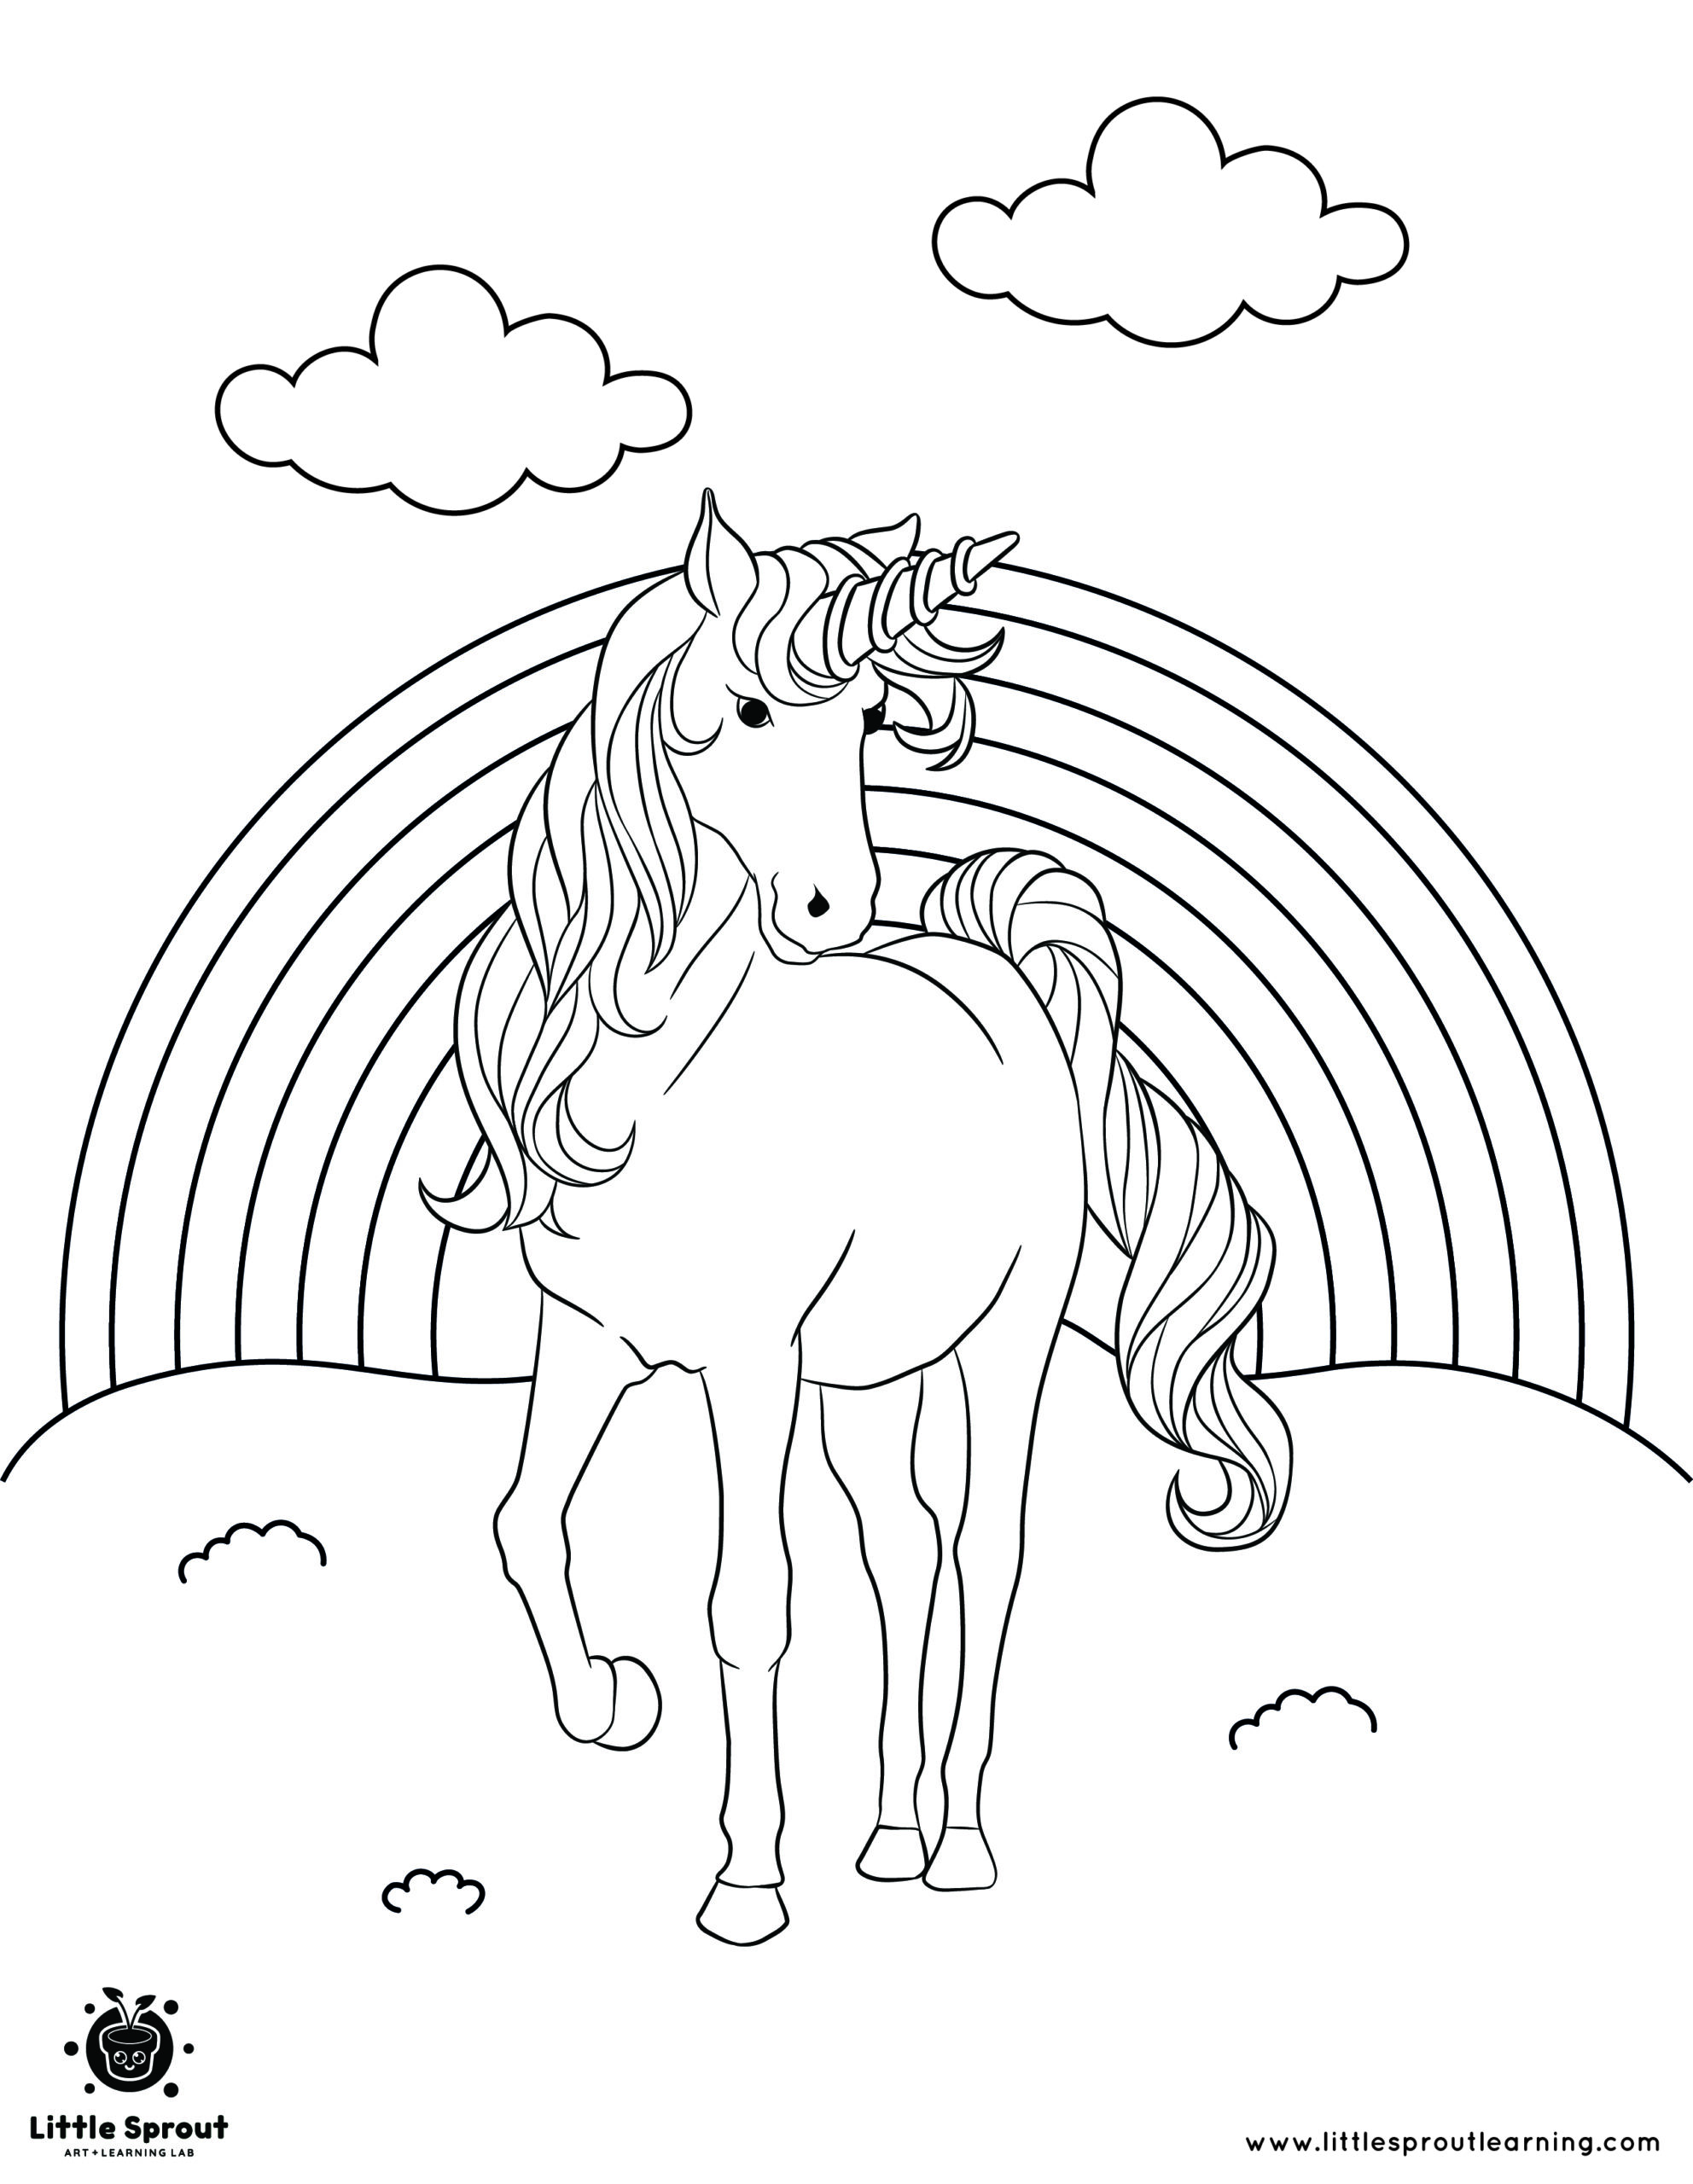 Unicorn Coloring Page in a Field